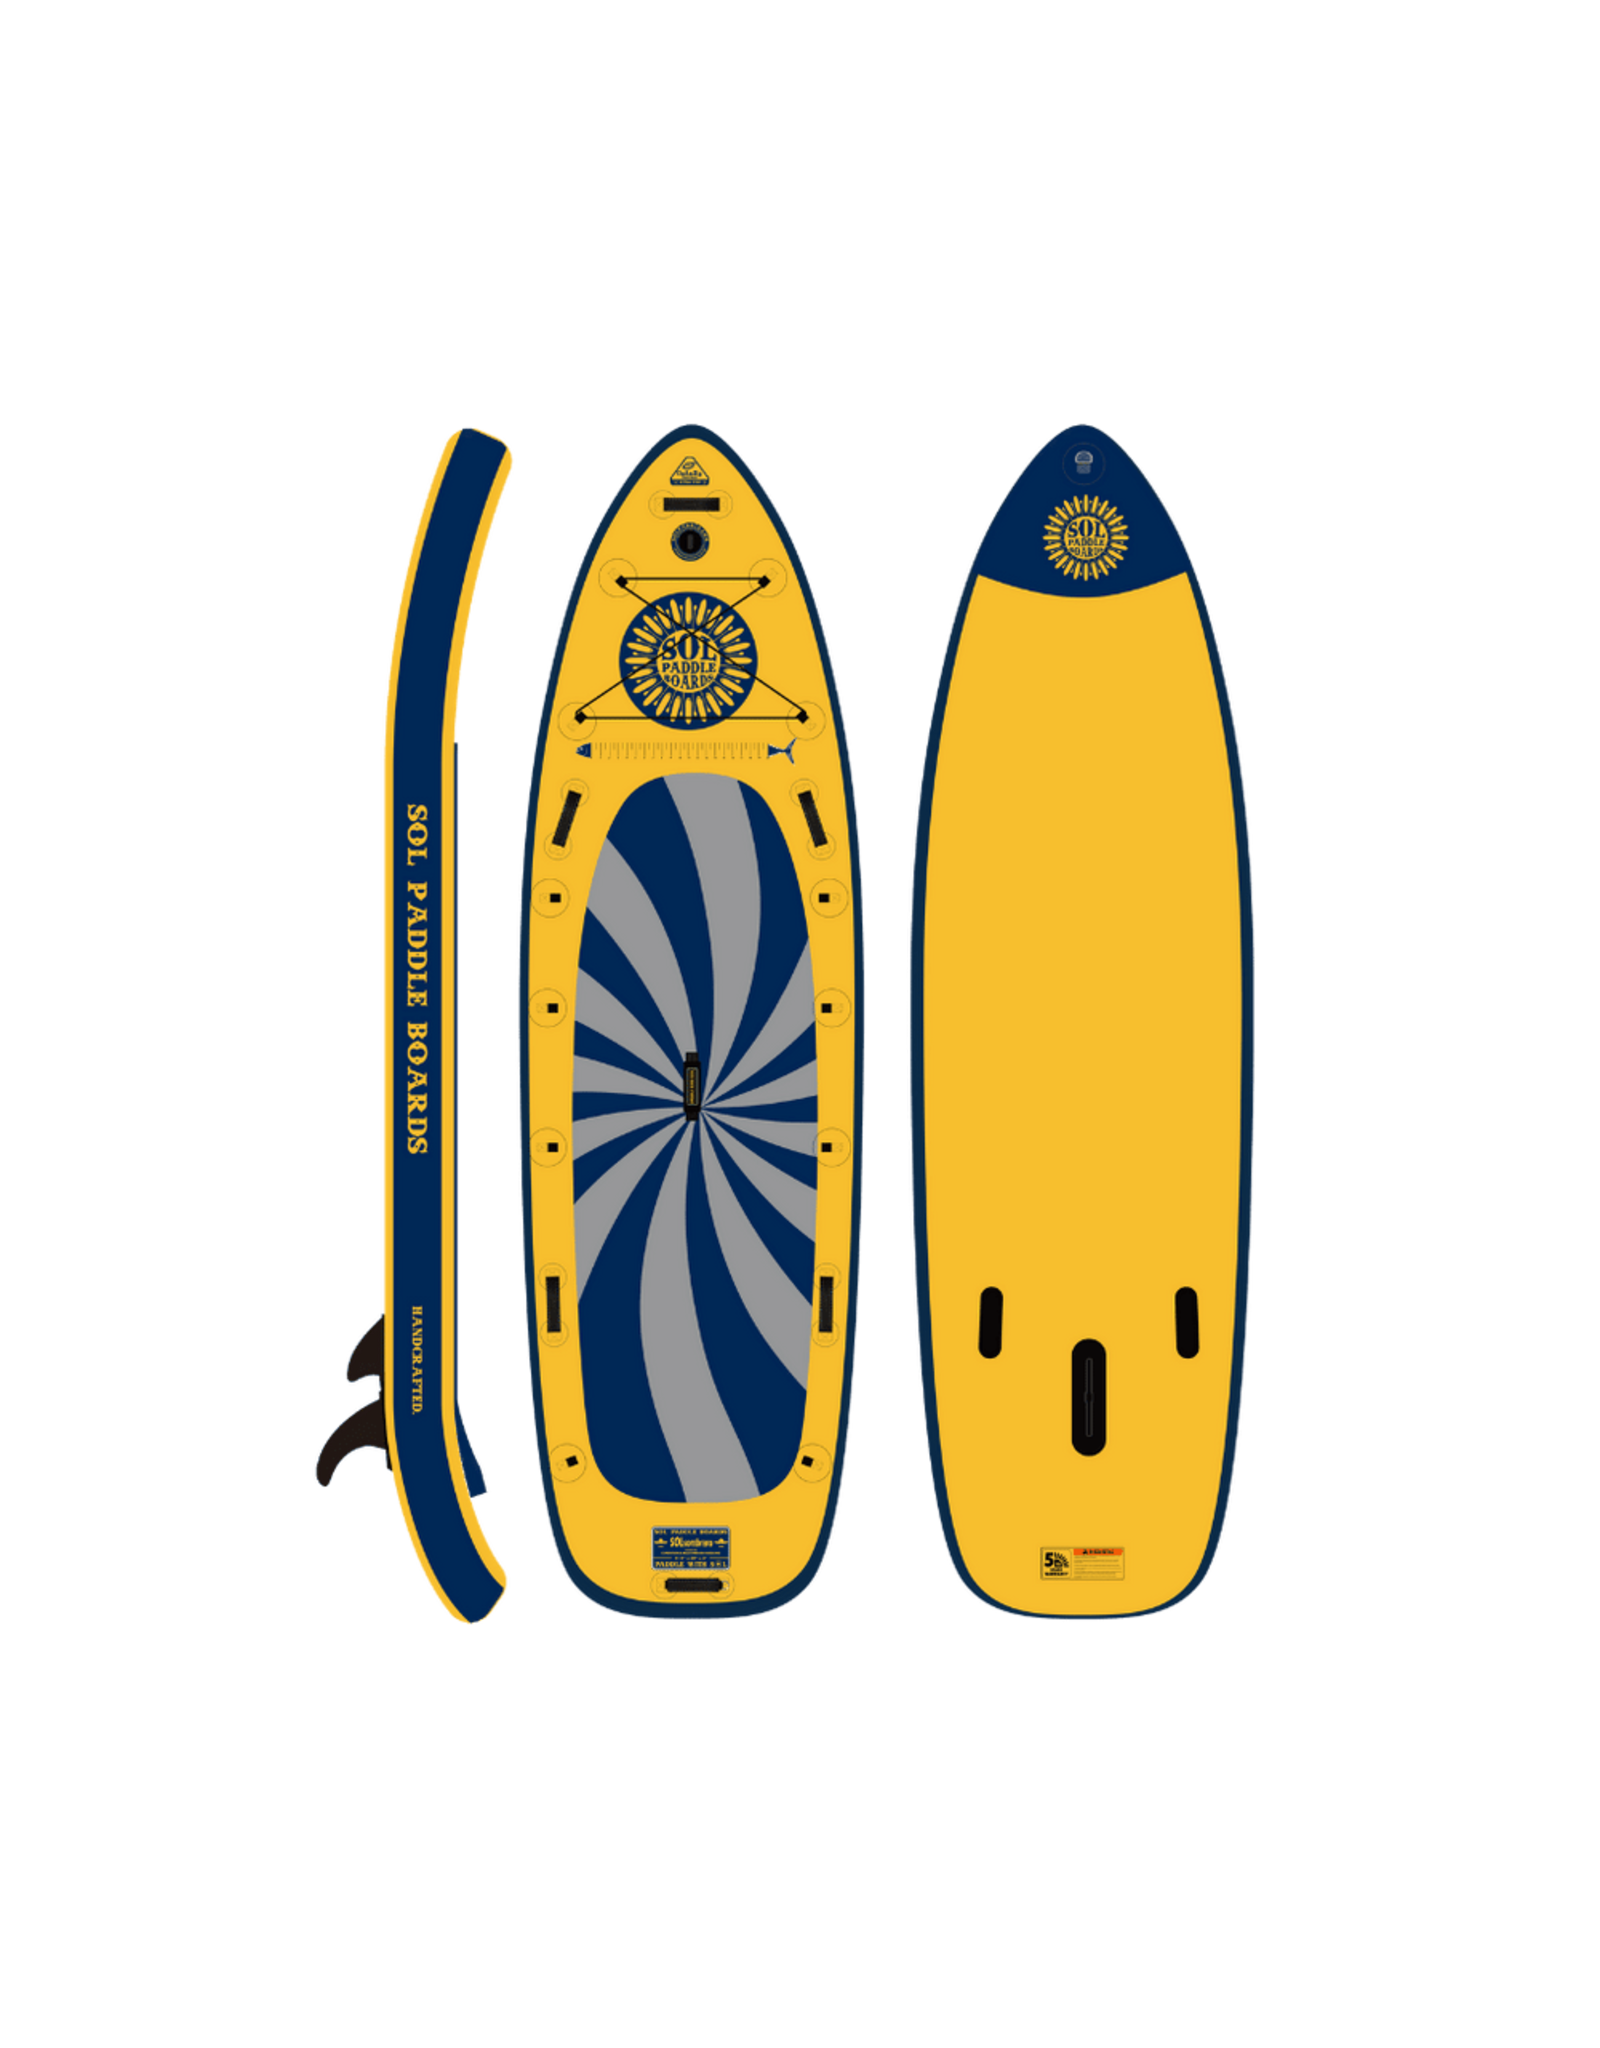 SOL Paddleboards SOLsombrero Infinity Inflatable Stand-Up Paddle Board